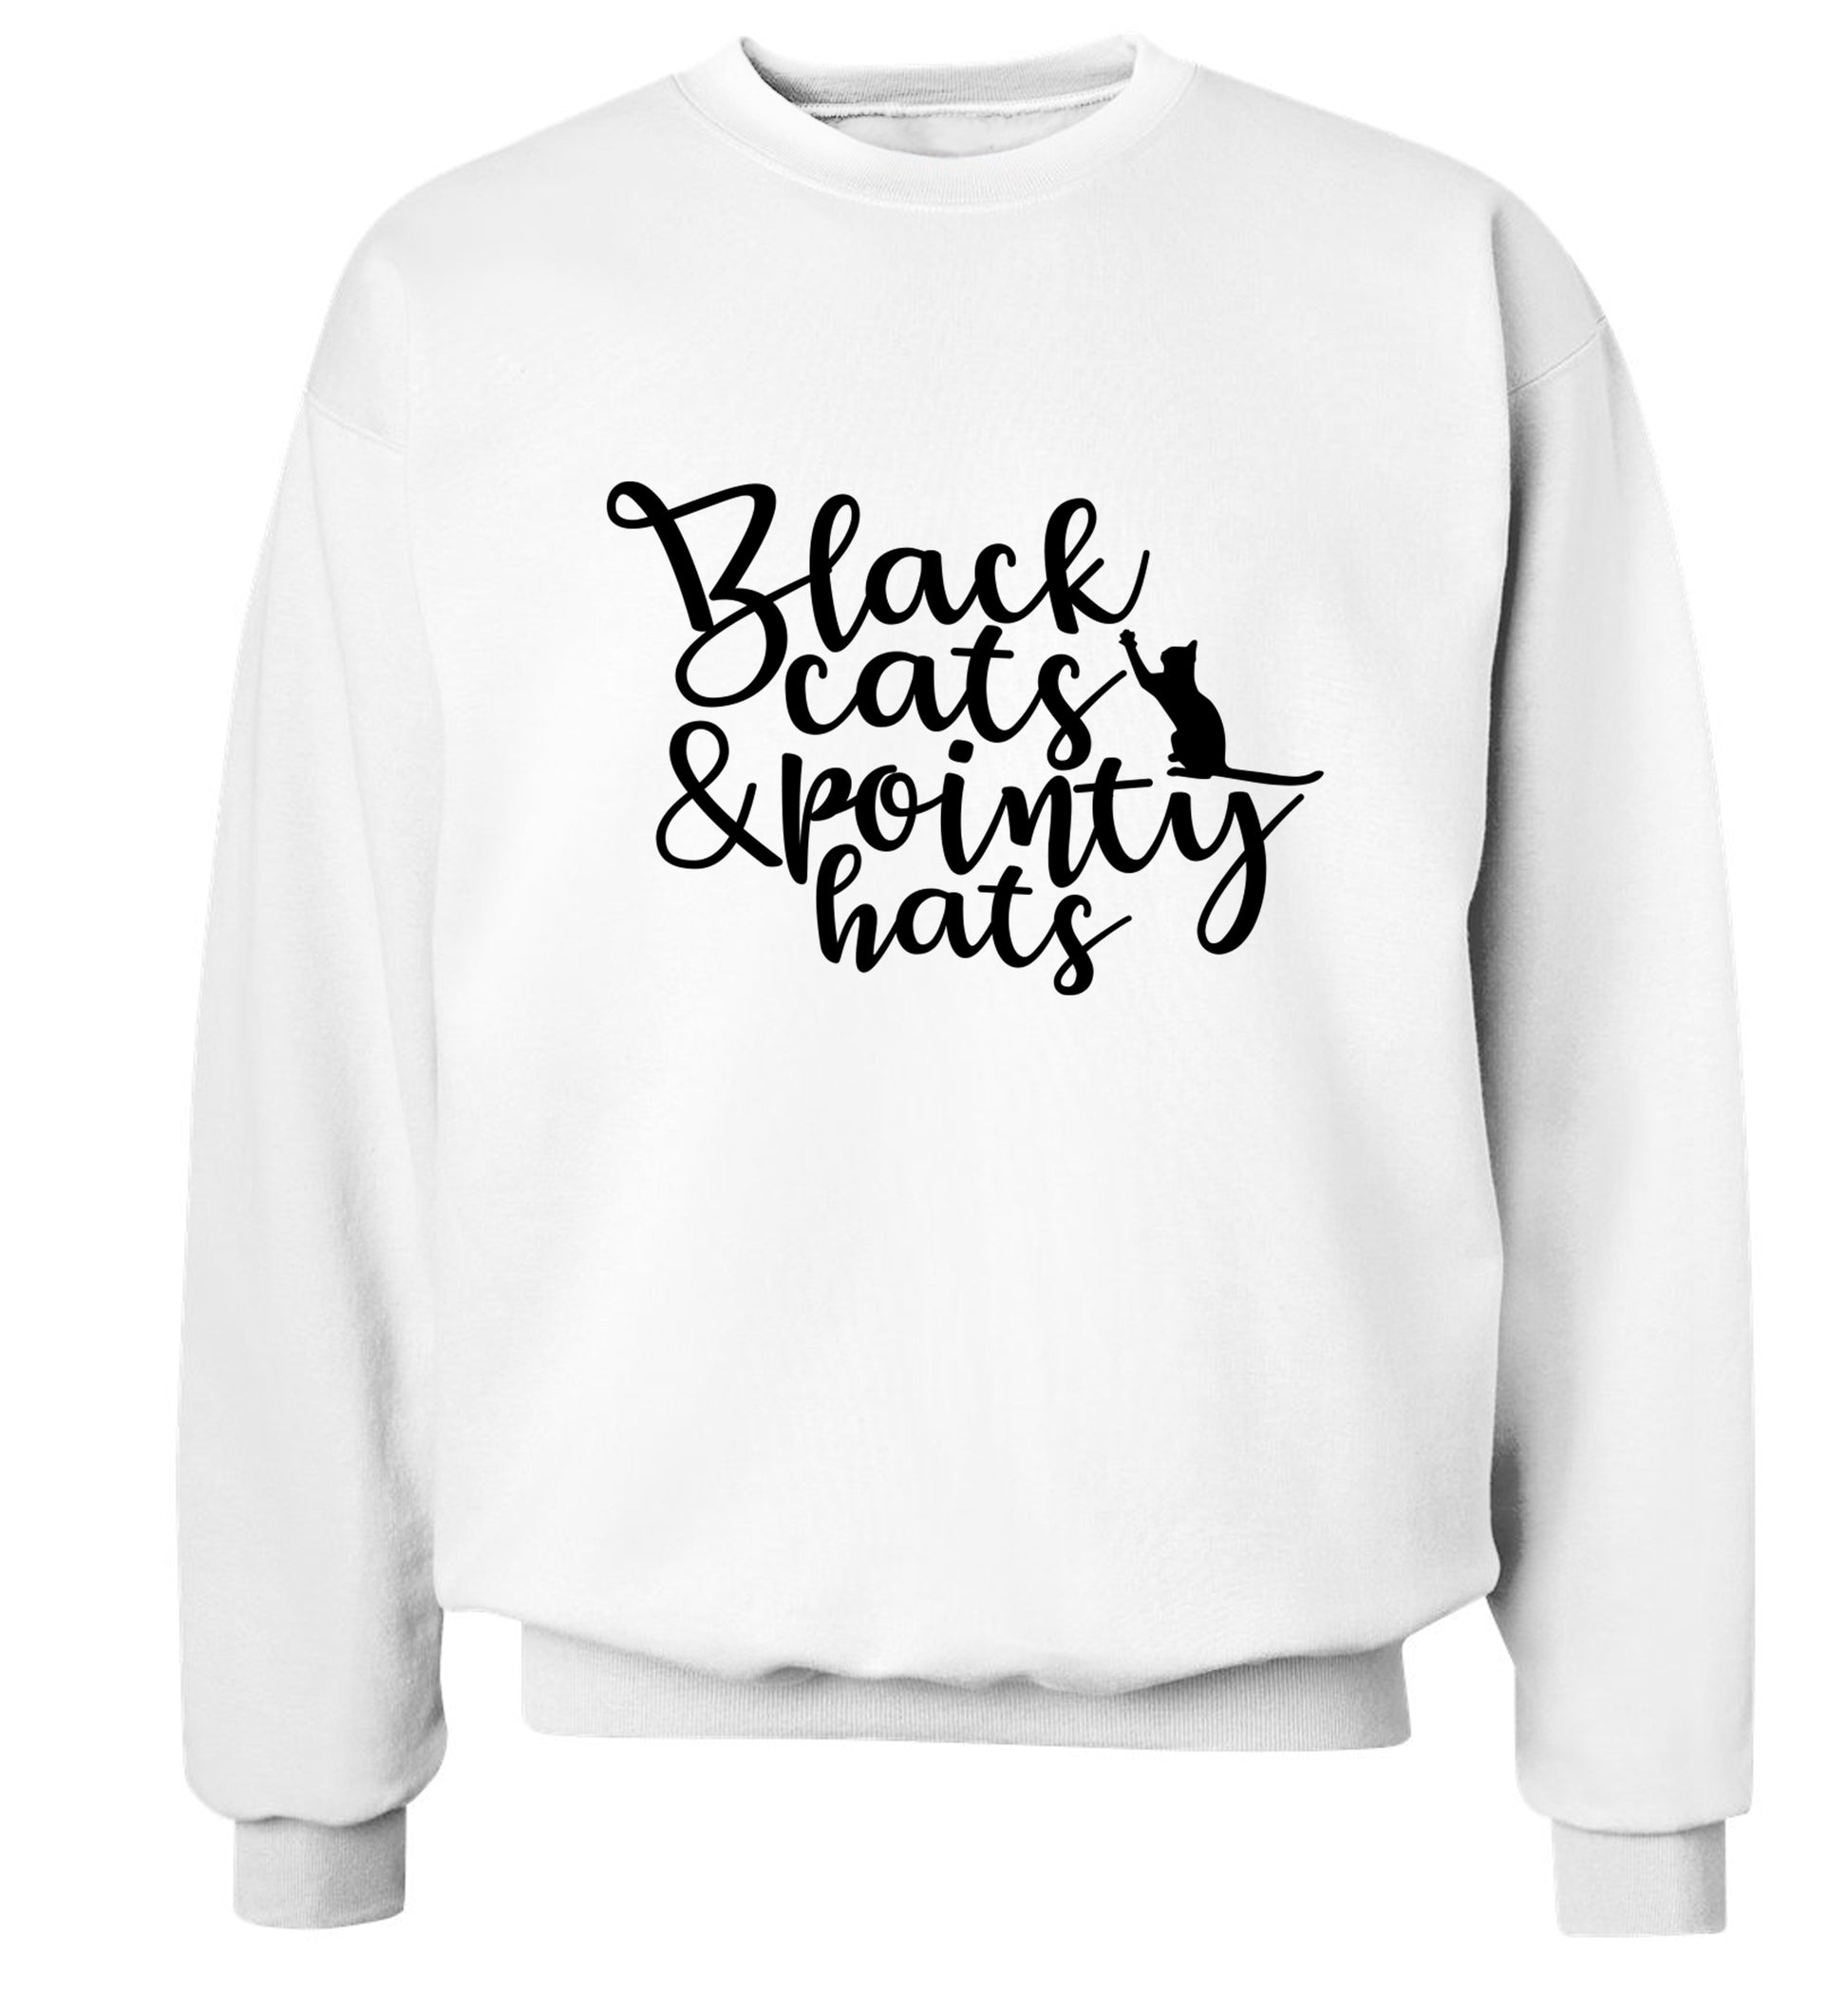 Black cats and pointy hats Adult's unisex white Sweater 2XL